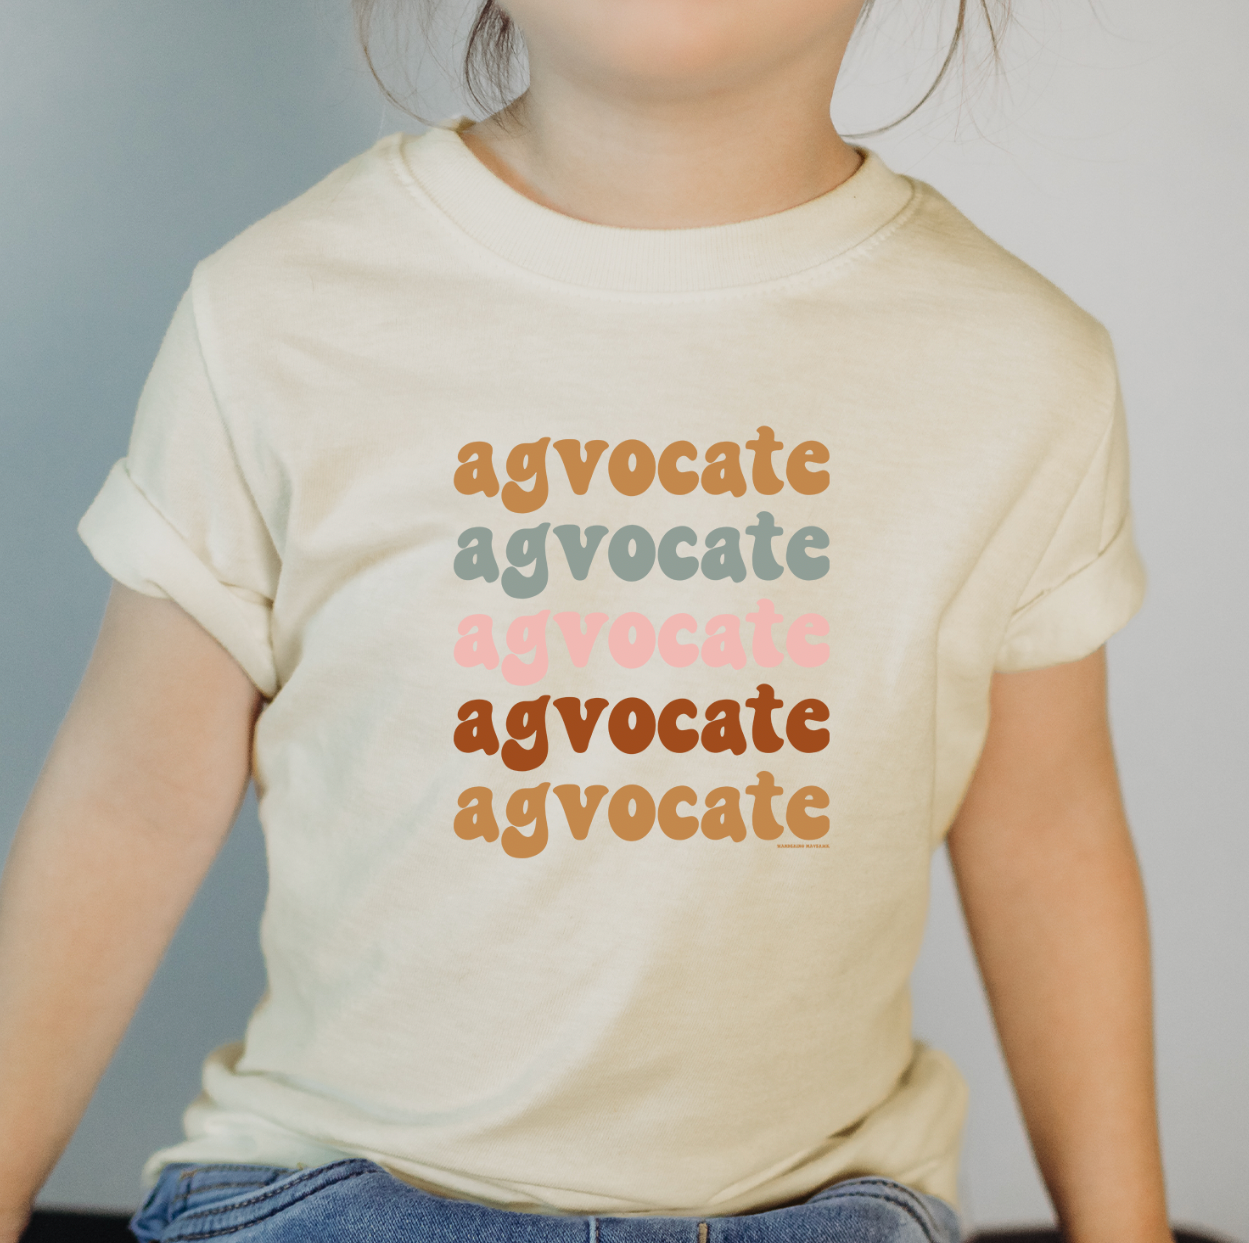 Groovy Agvocate One Piece/T-Shirt (Newborn - Youth XL) - Multiple Colors!